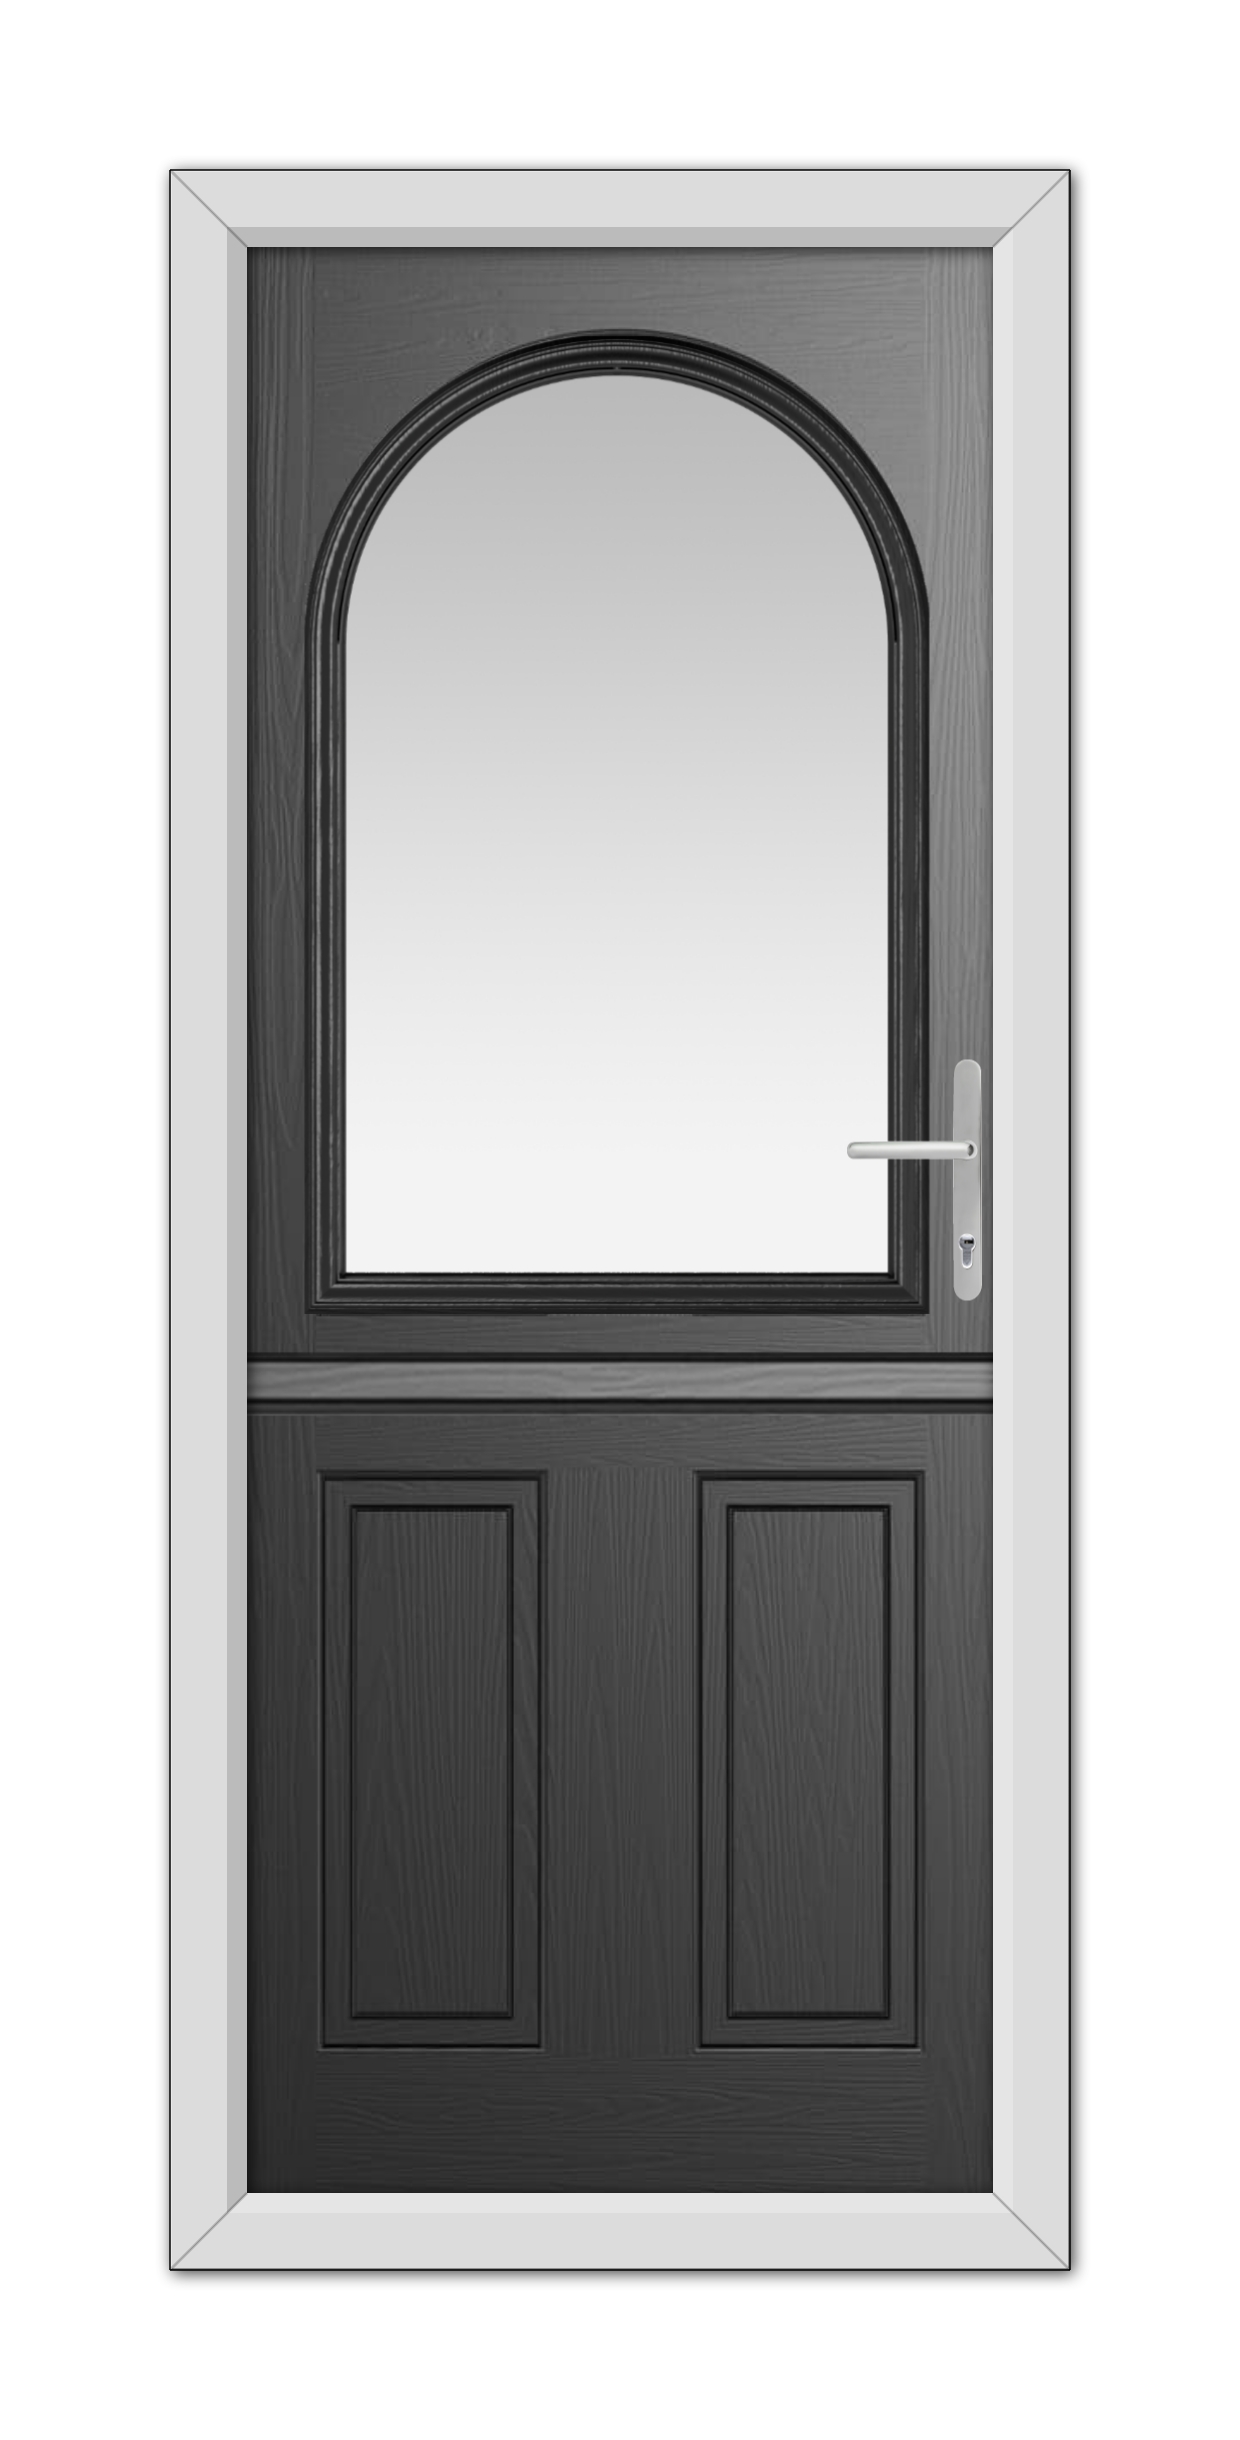 A modern Black Grafton Stable Composite Door 48mm Timber Core with a large arched window at the top, set within a white frame, featuring a metallic handle on the right side.